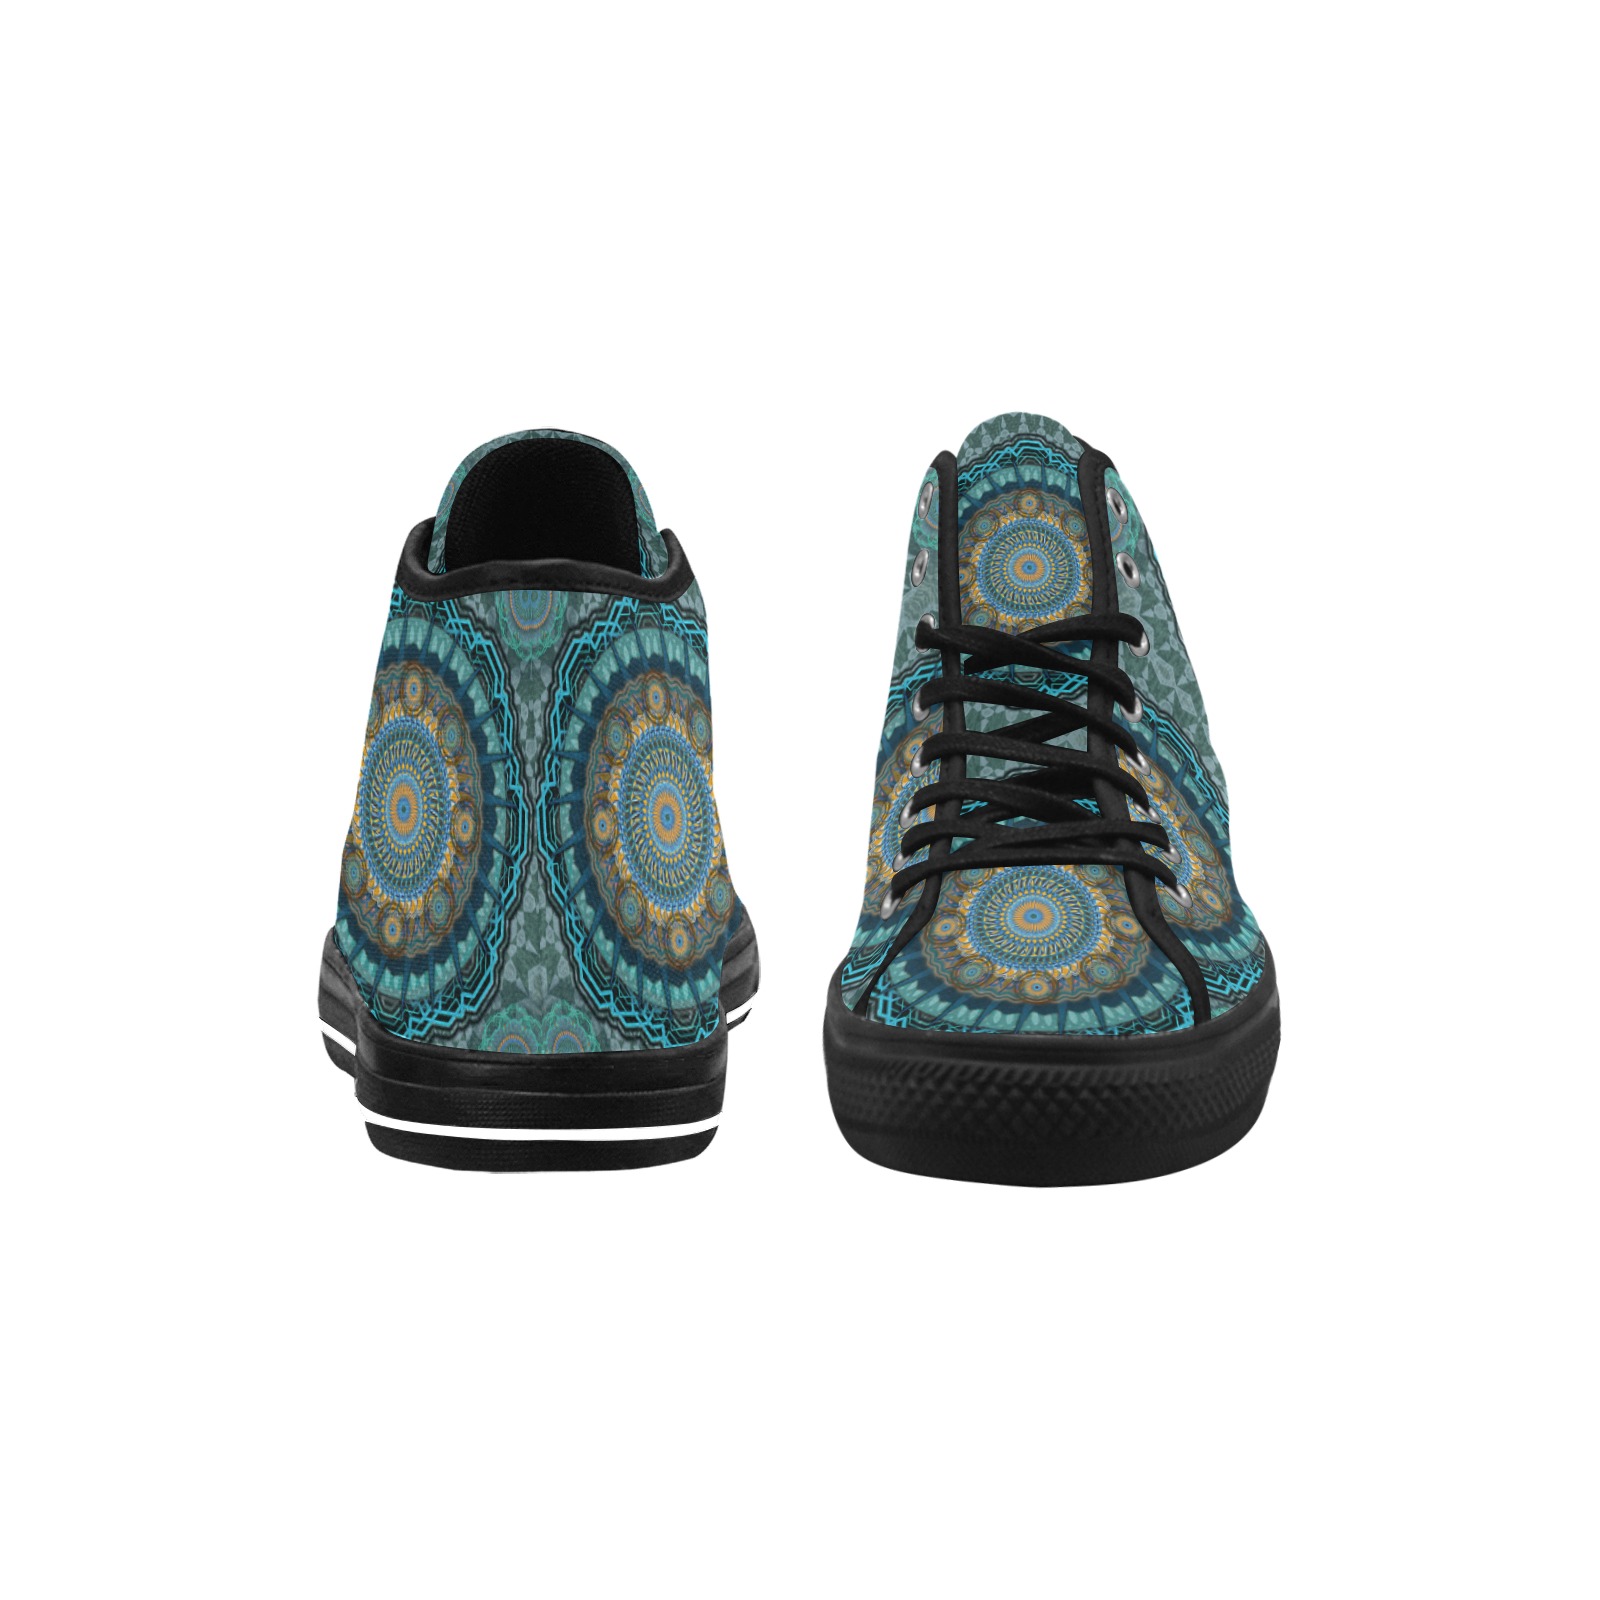 The Persian's gyrate psychedelic eyes' mandala Vancouver H Men's Canvas Shoes (1013-1)